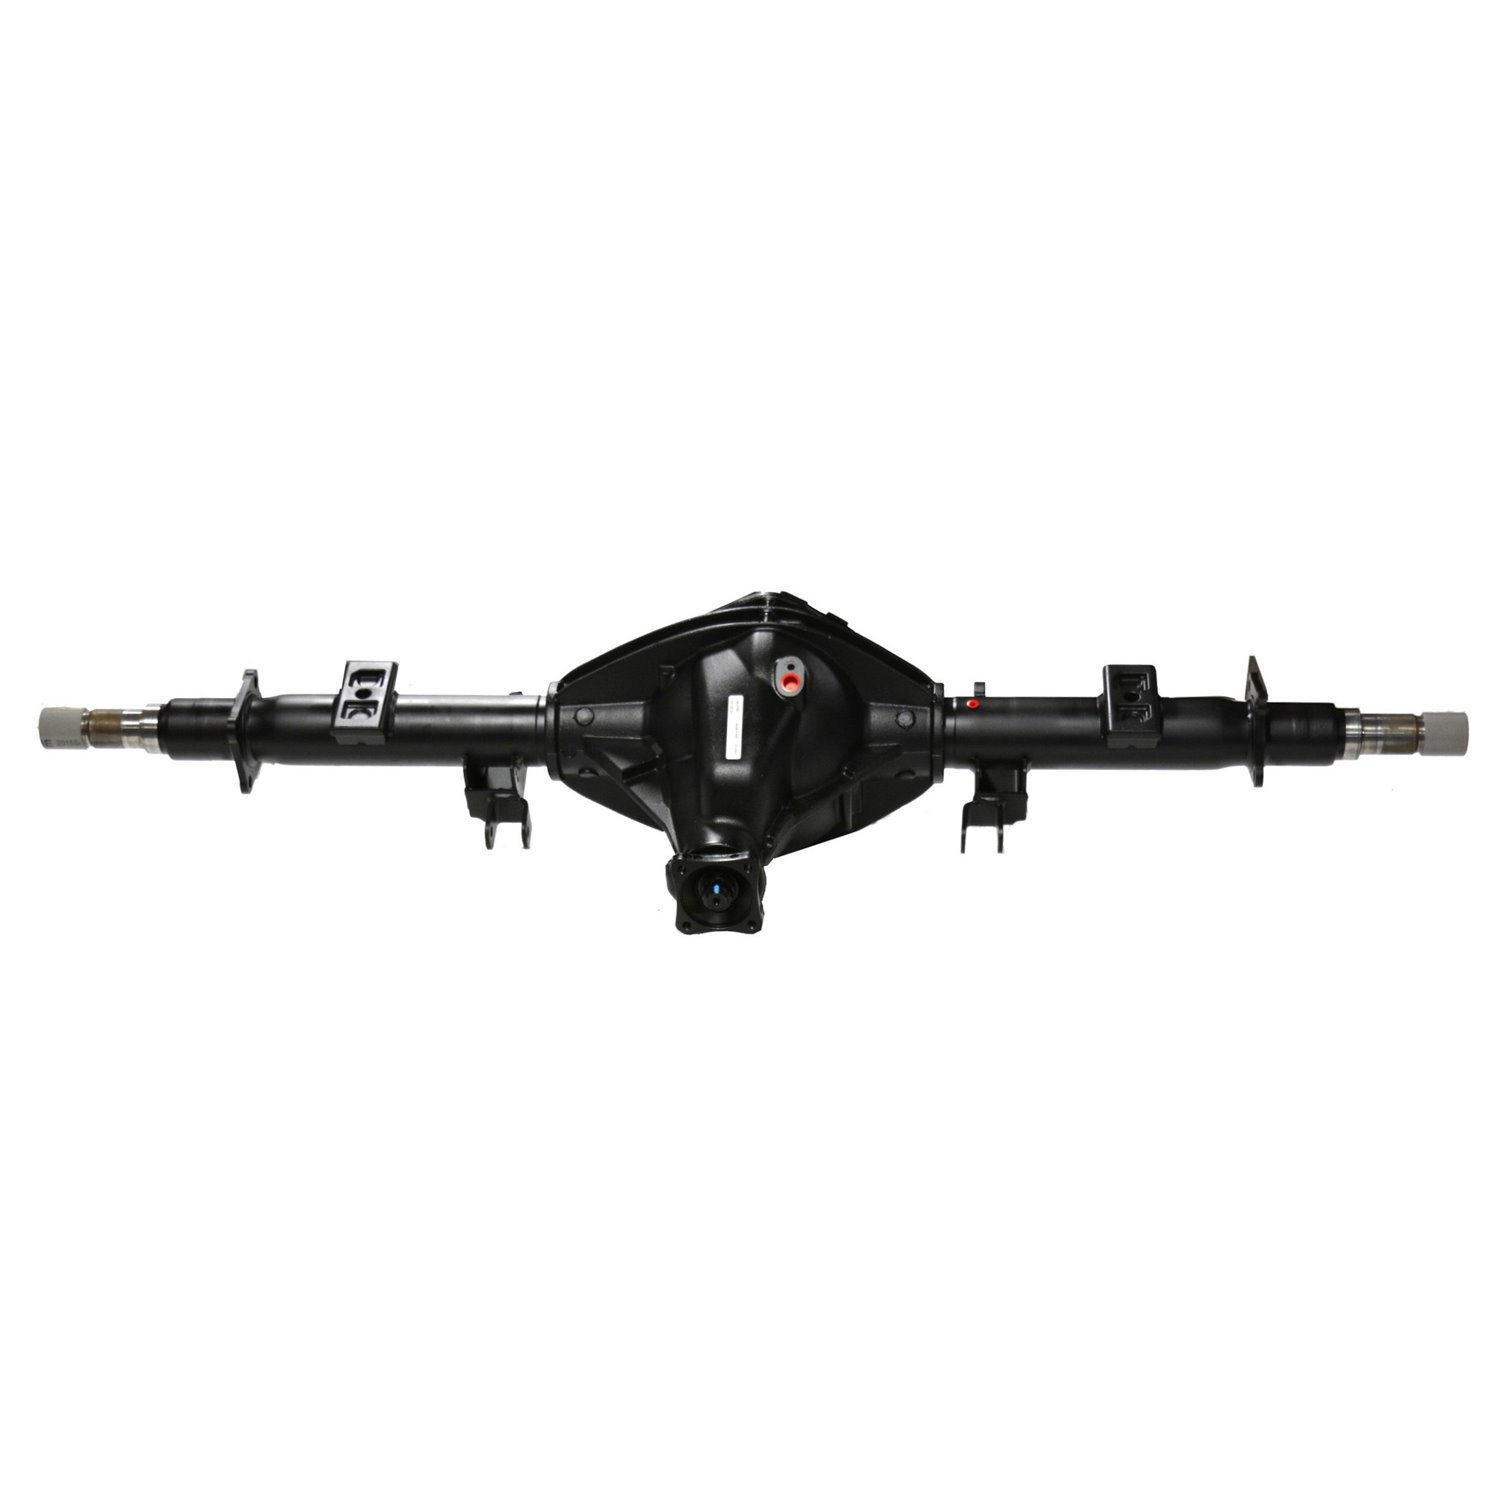 Remanufactured AAM 11.5" AXLE ASSY '07-'08 CHY RAM DRW 3500 CAB CHASSIS, 4.10, 2WD & 4WD